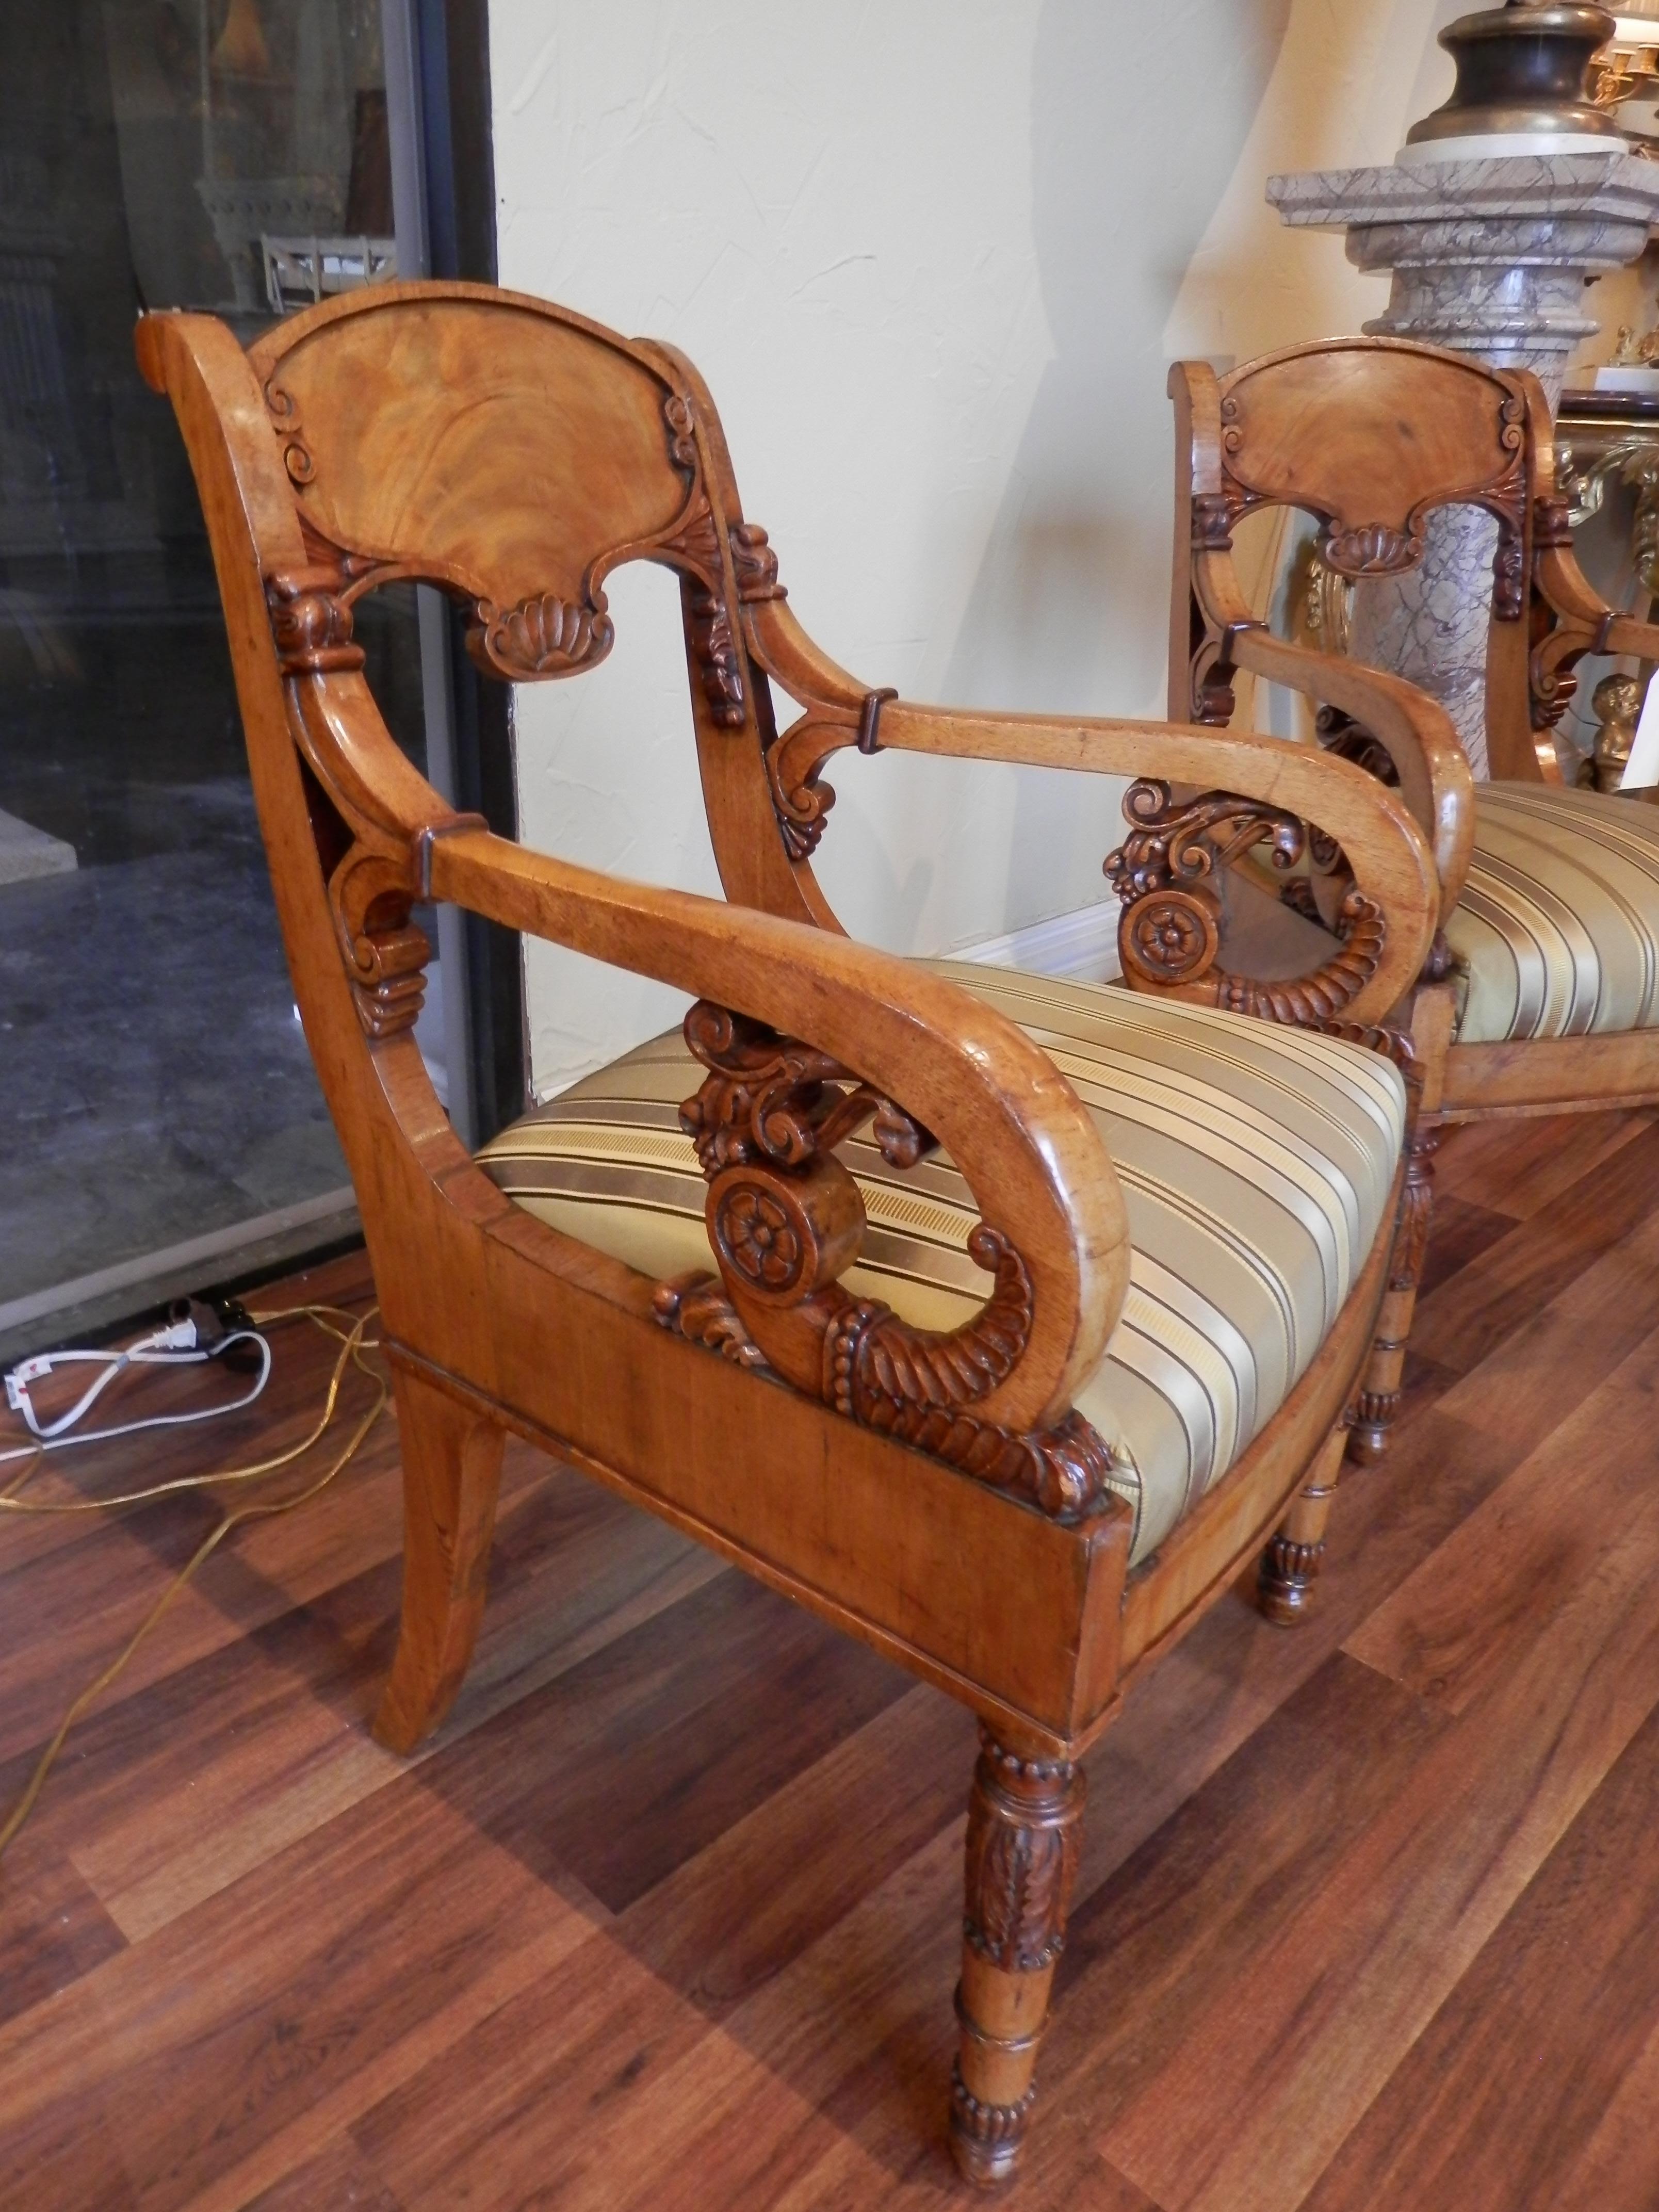 Pair of Rare Early 19th Century Baltic Neoclassical Chairs In Good Condition For Sale In Dallas, TX